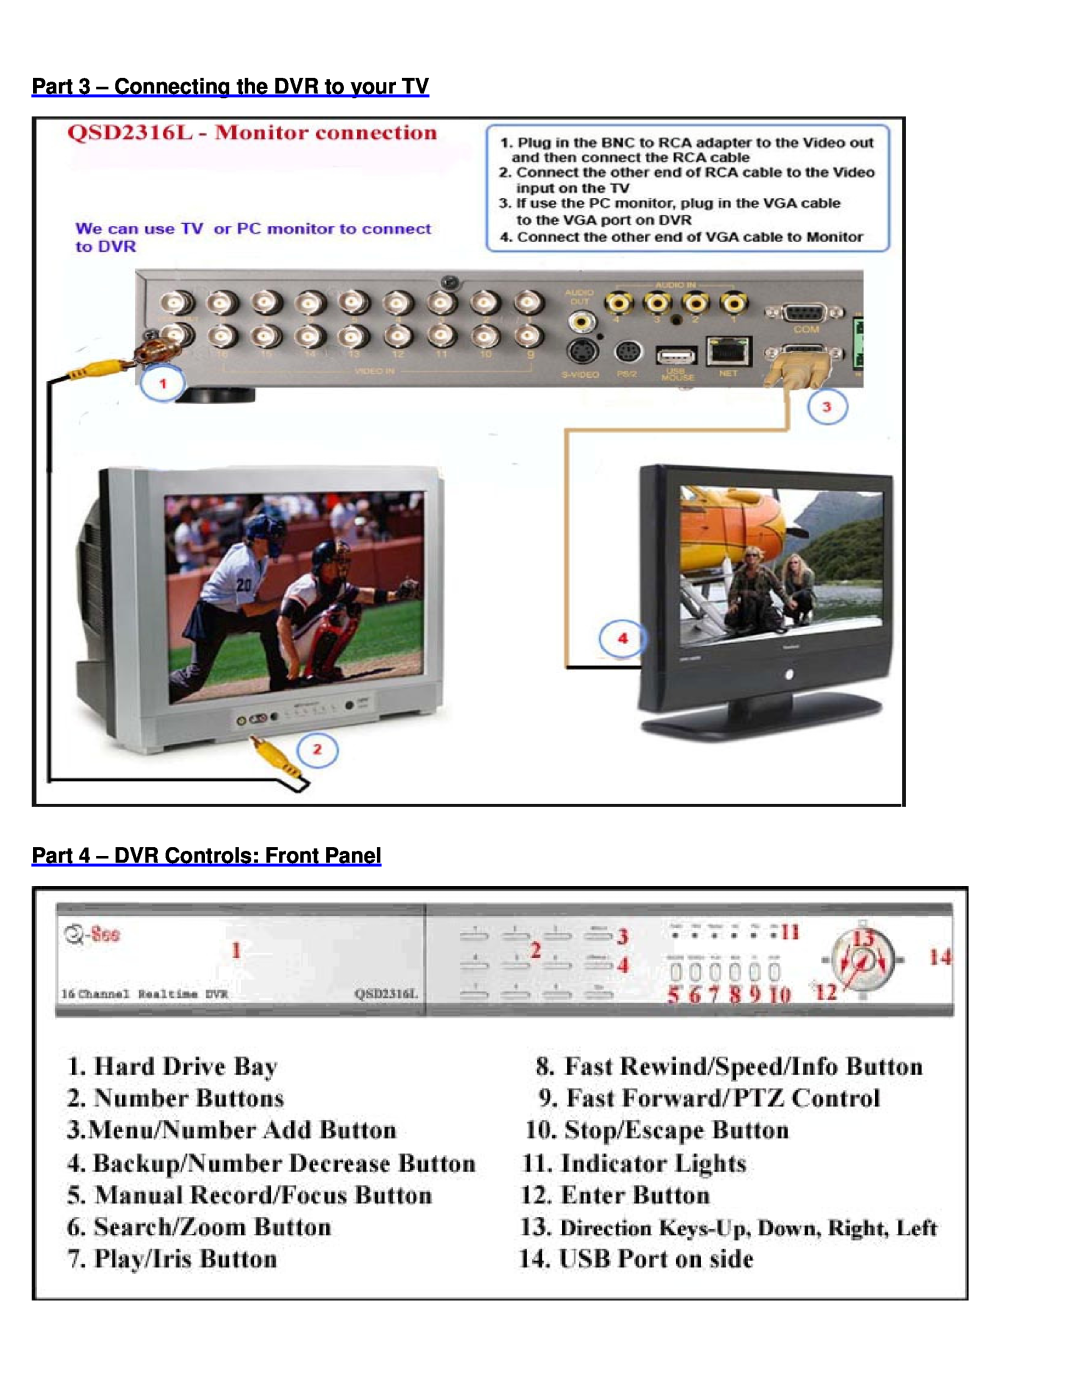 Q-See QSD2316C8-500 manual Part 3 - Connecting the DVR to your TV, Part 4 - DVR Controls Front Panel 